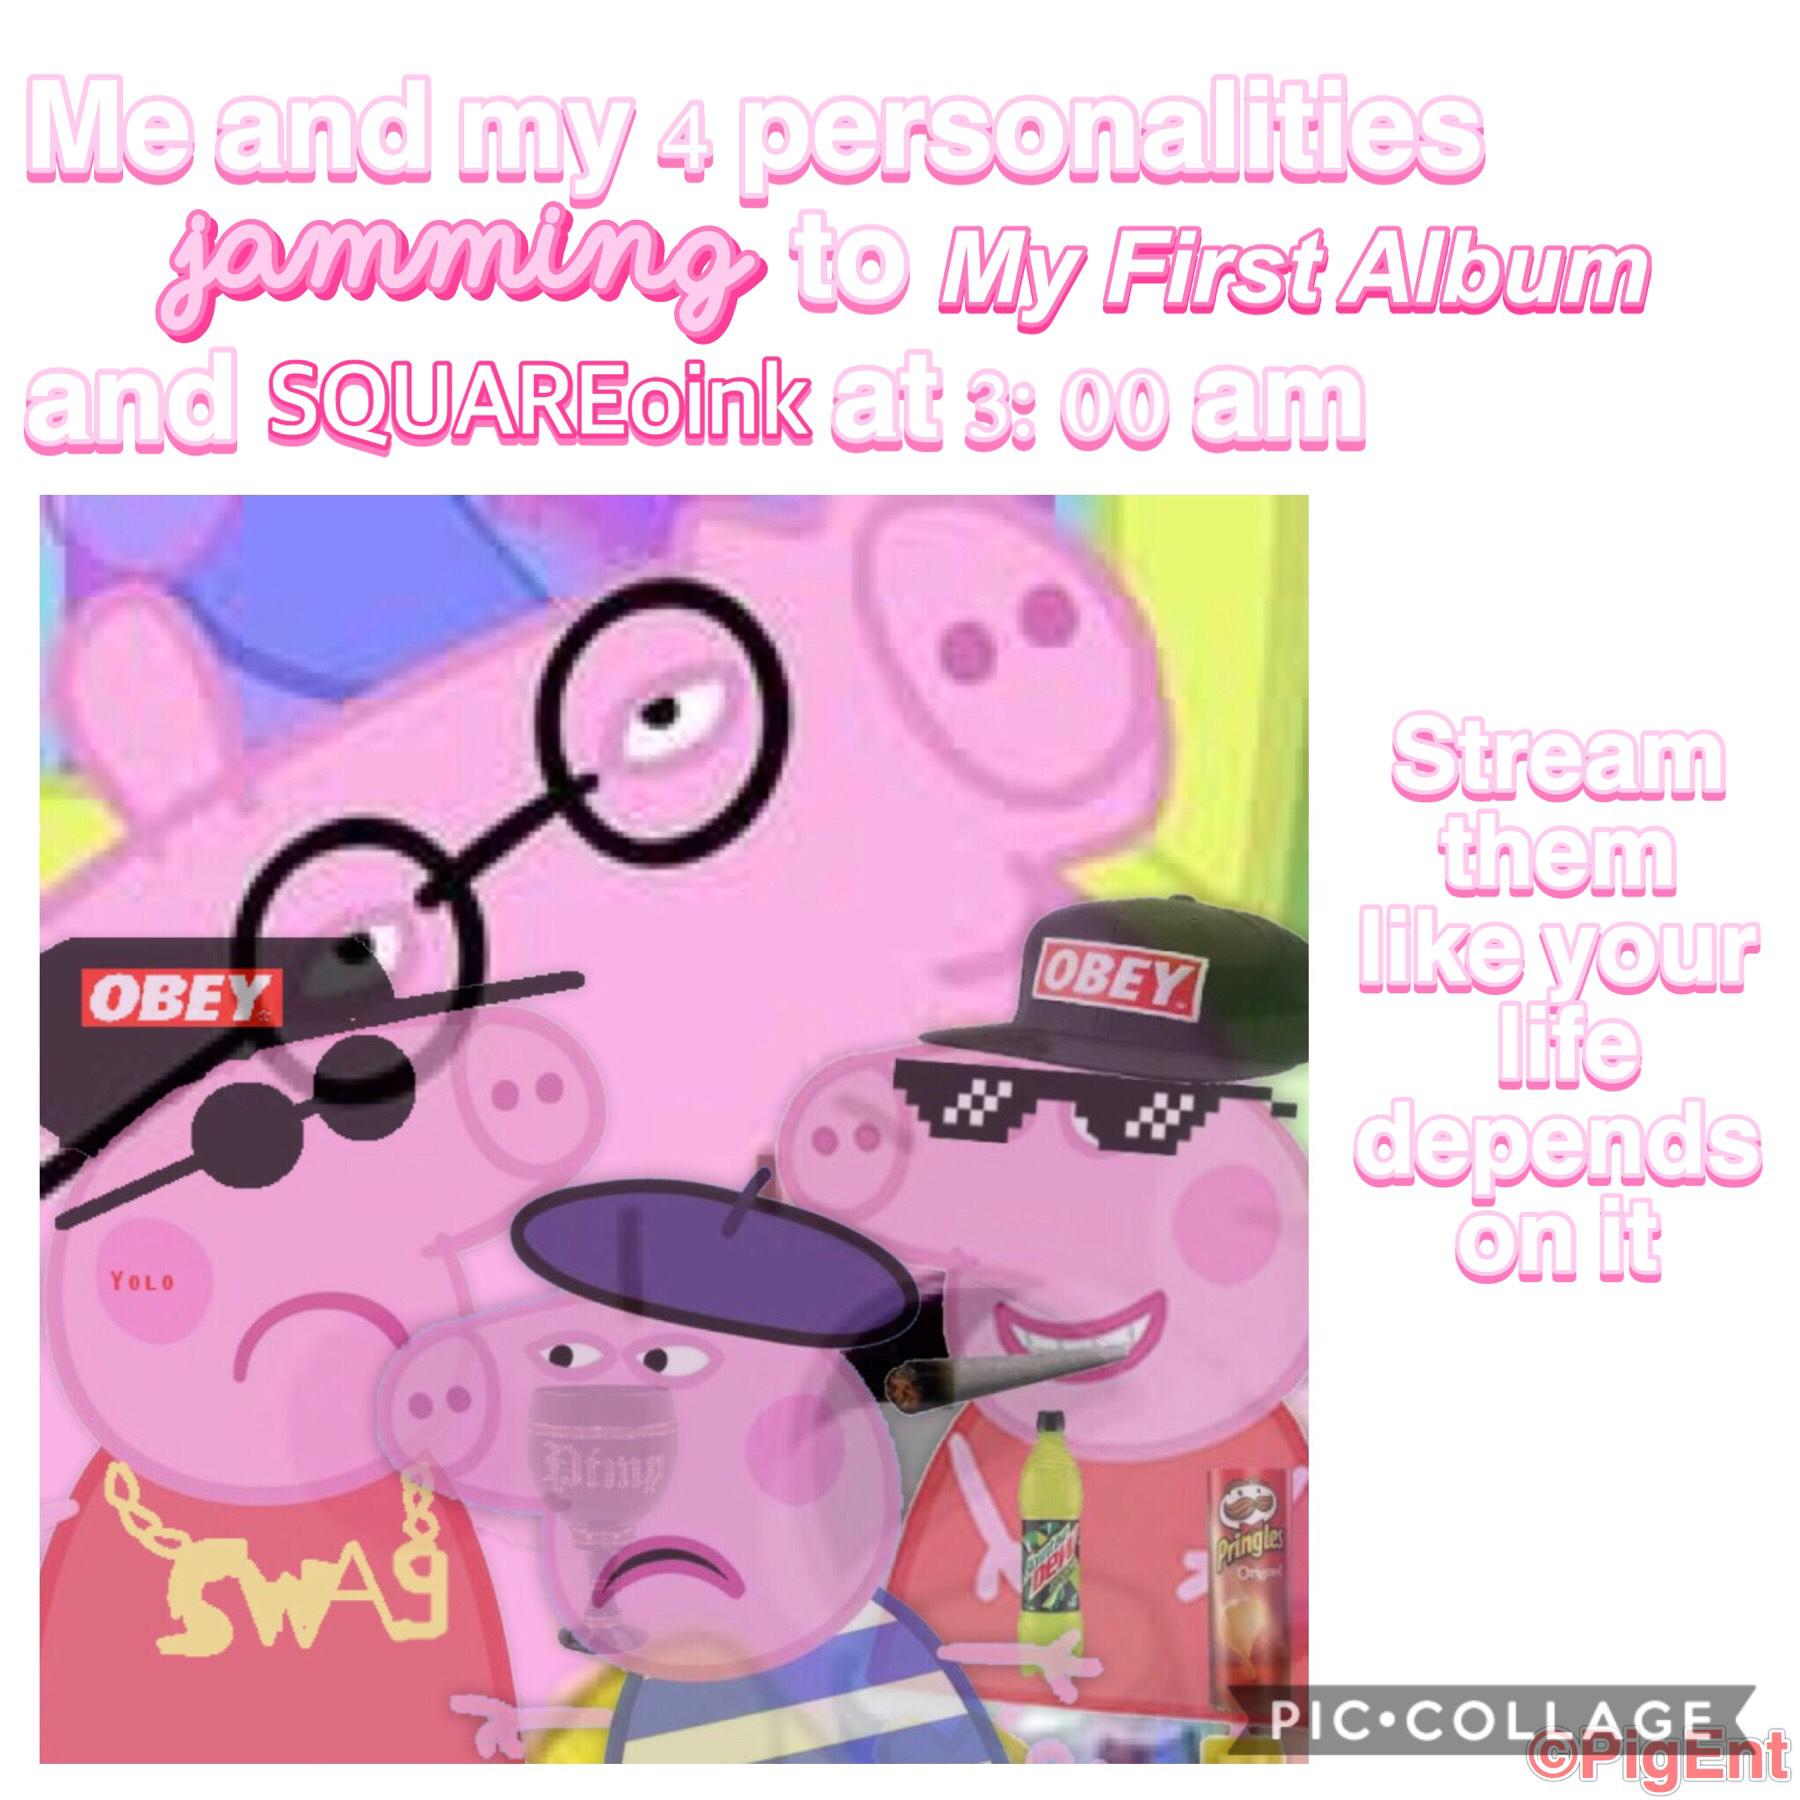 did the maths wrong but Peppa says it’s the thought that counts 🐷
their albums changed my life for the better 🐷🥰❤️🤧

~Lia 